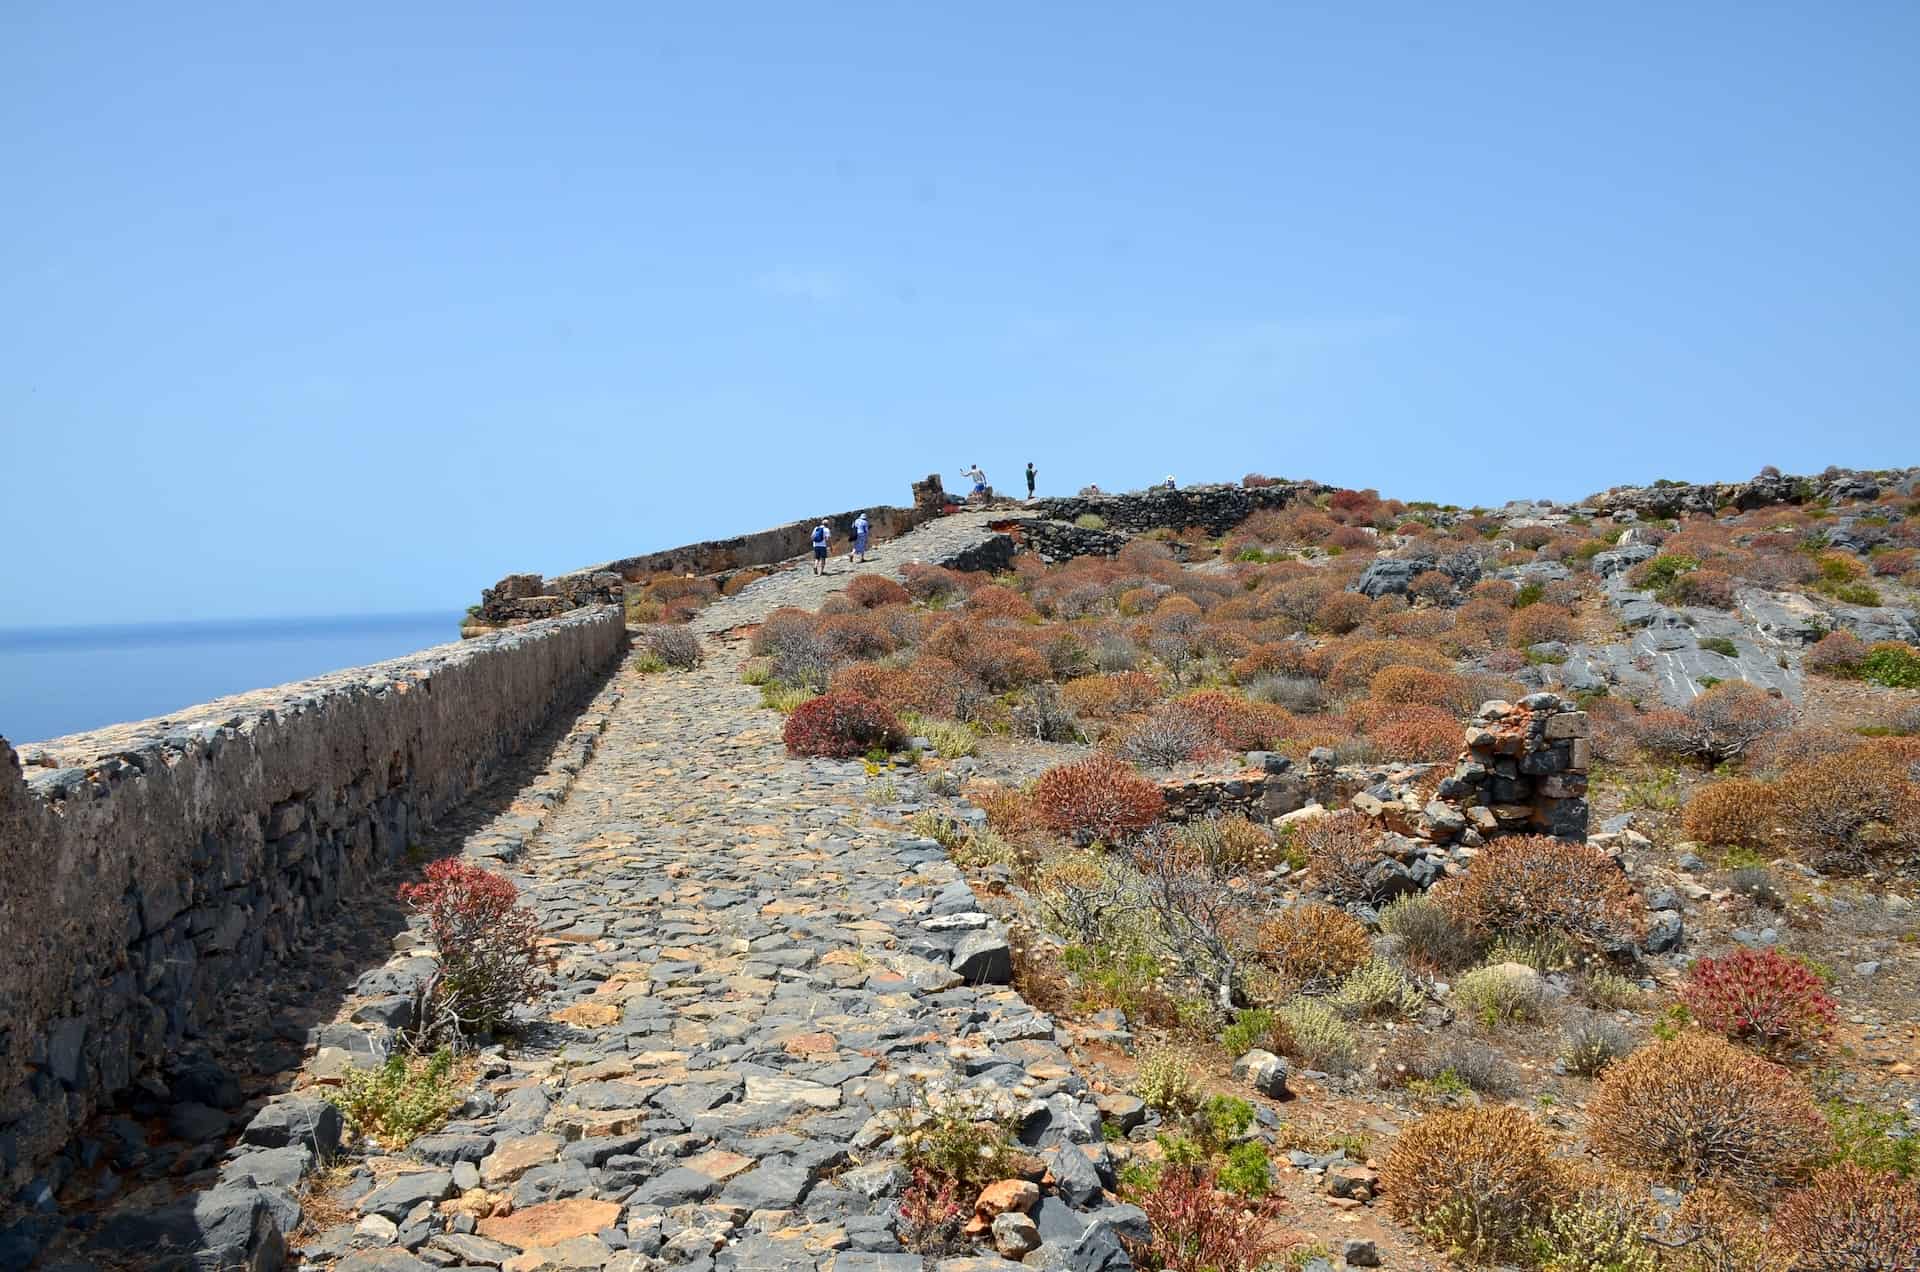 Southern ramparts of the Venetian fortress on Gramvousa, Crete